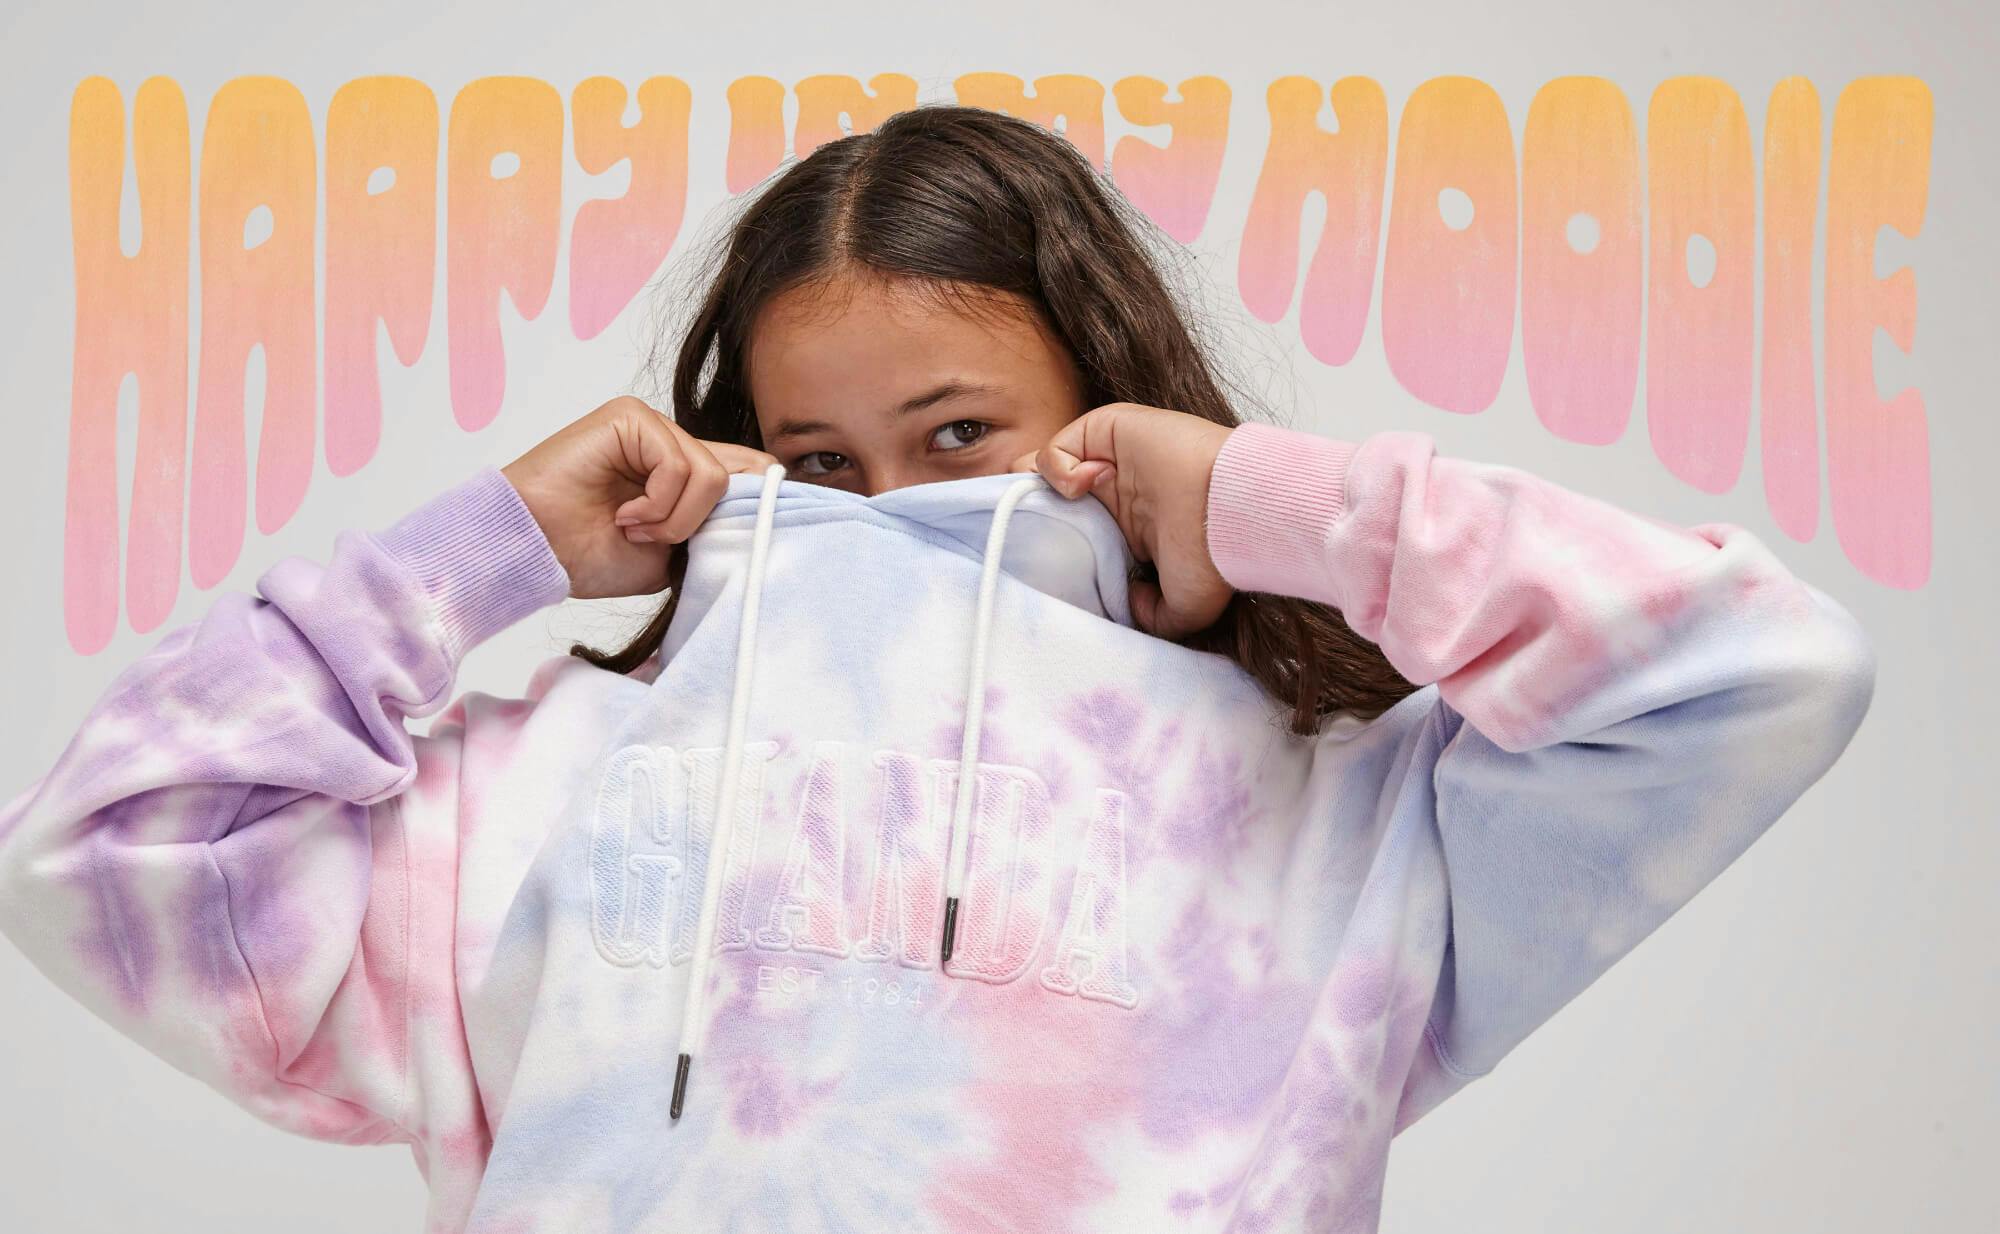 Teen banner with hand drawn bubble writing around the image of a teen girl wearing the Hailey hoodie. Text reads "happy in my hoodie"